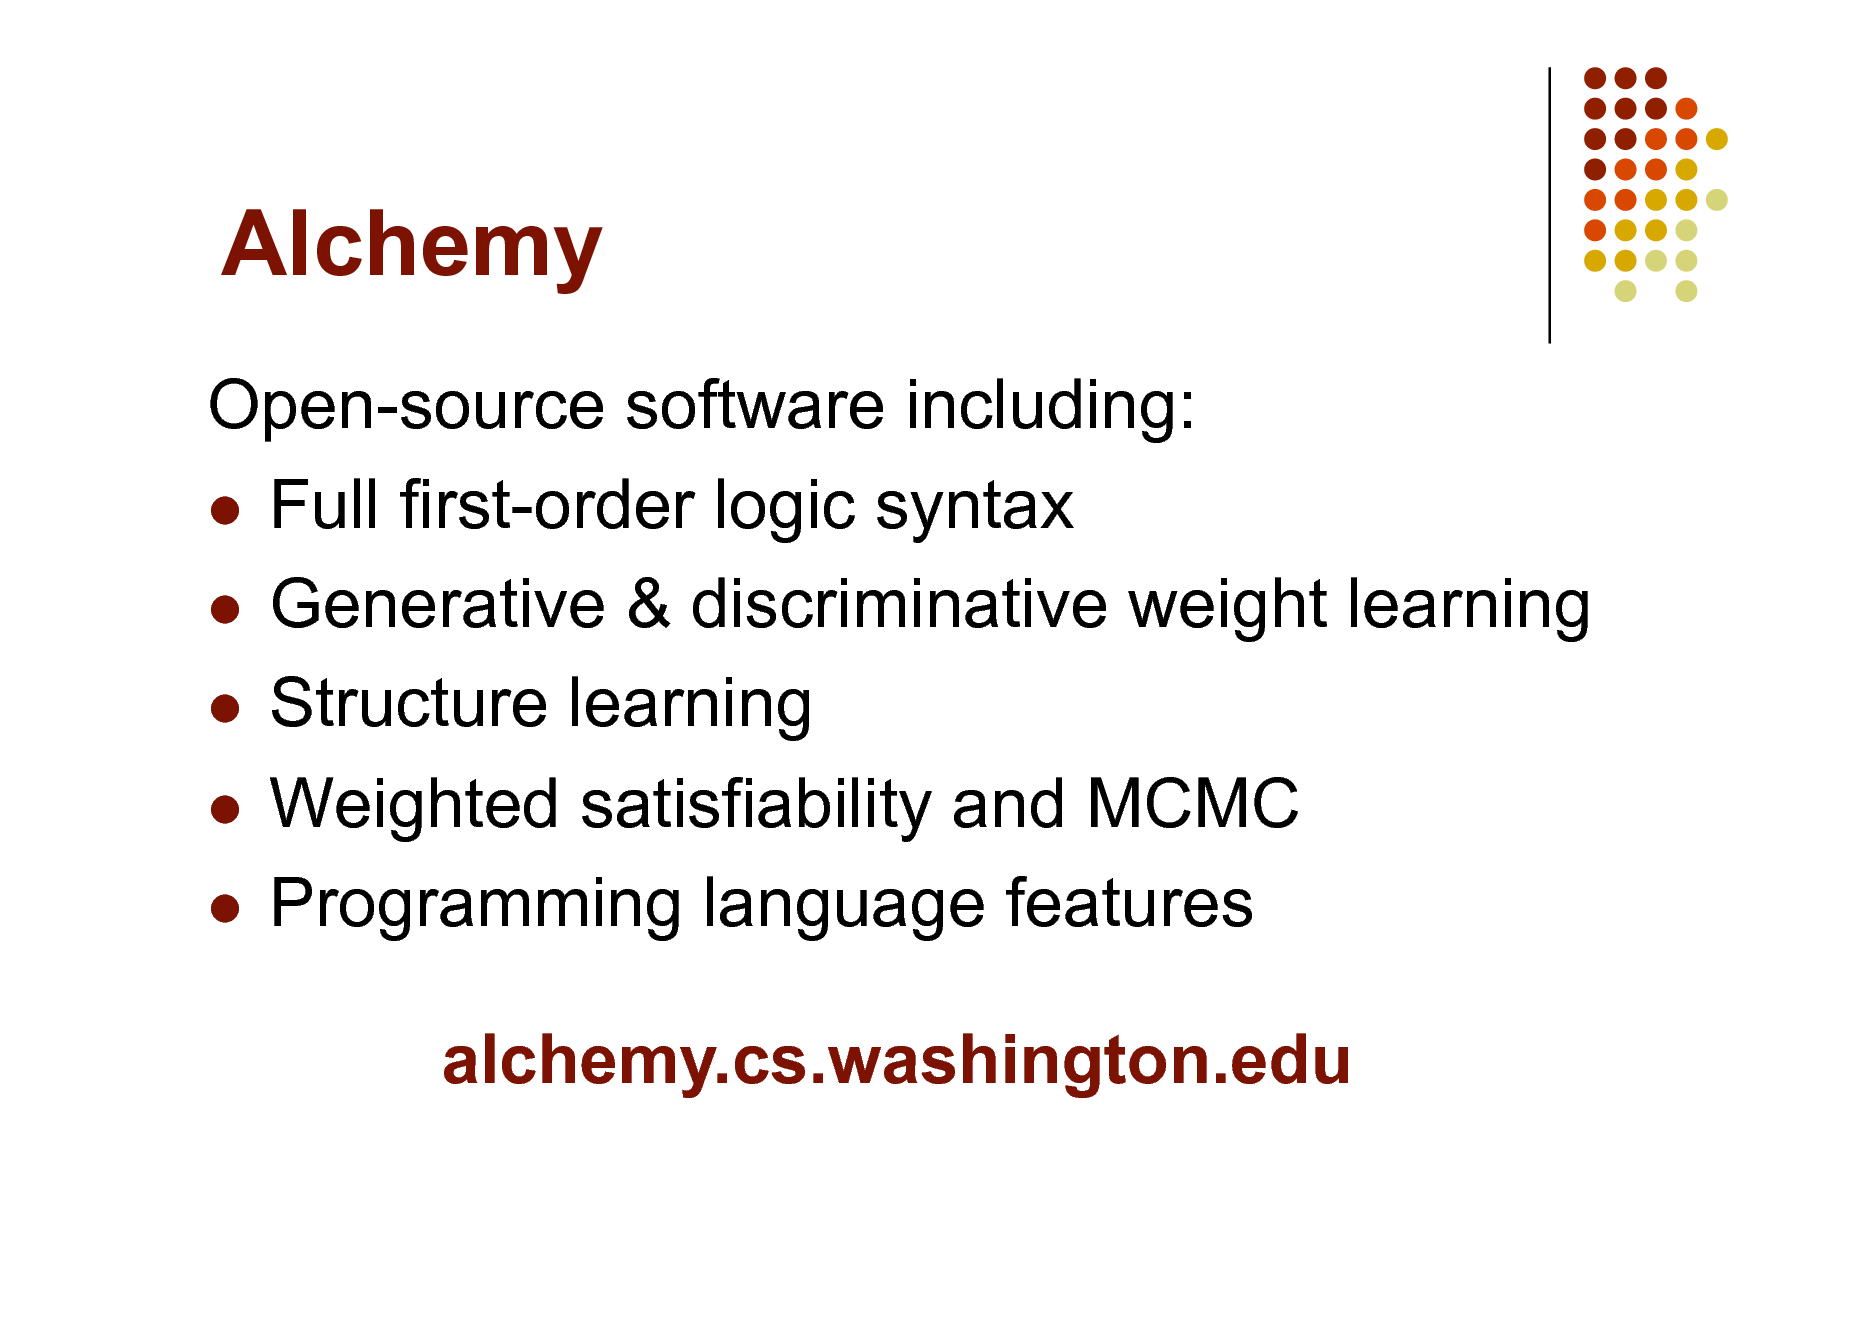 Slide: Alchemy
Open-source software including:  Full first-order logic syntax  Generative & discriminative weight learning  Structure learning  Weighted satisfiability and MCMC  Programming language features alchemy.cs.washington.edu

